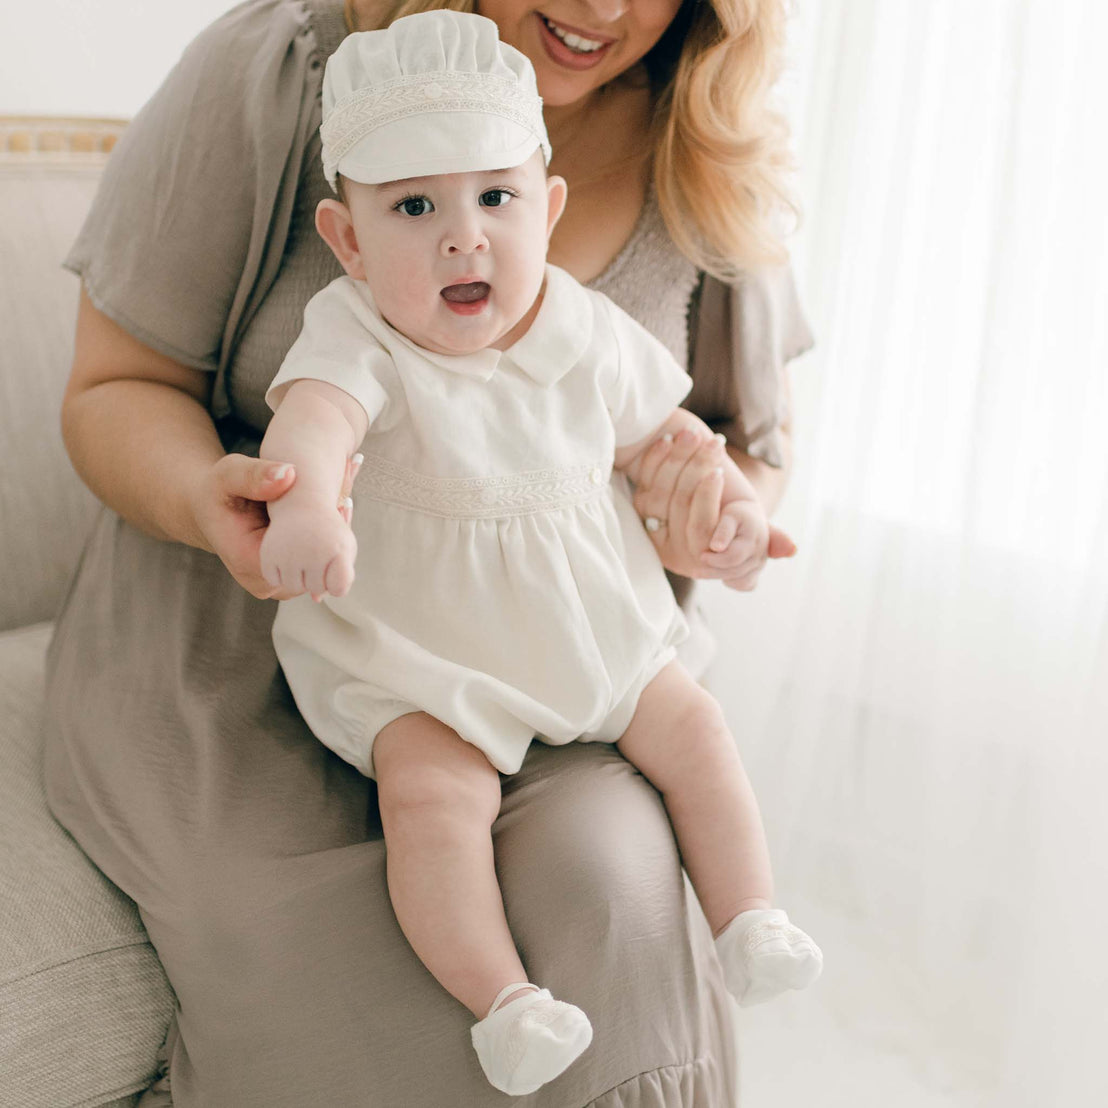 Baby boy sitting on chair with mom and wearing the Oliver Romper, a bubble romper made from linen featuring a collar and bodice with buttons and Venice lace detail (without the Oliver Convertible Gown).